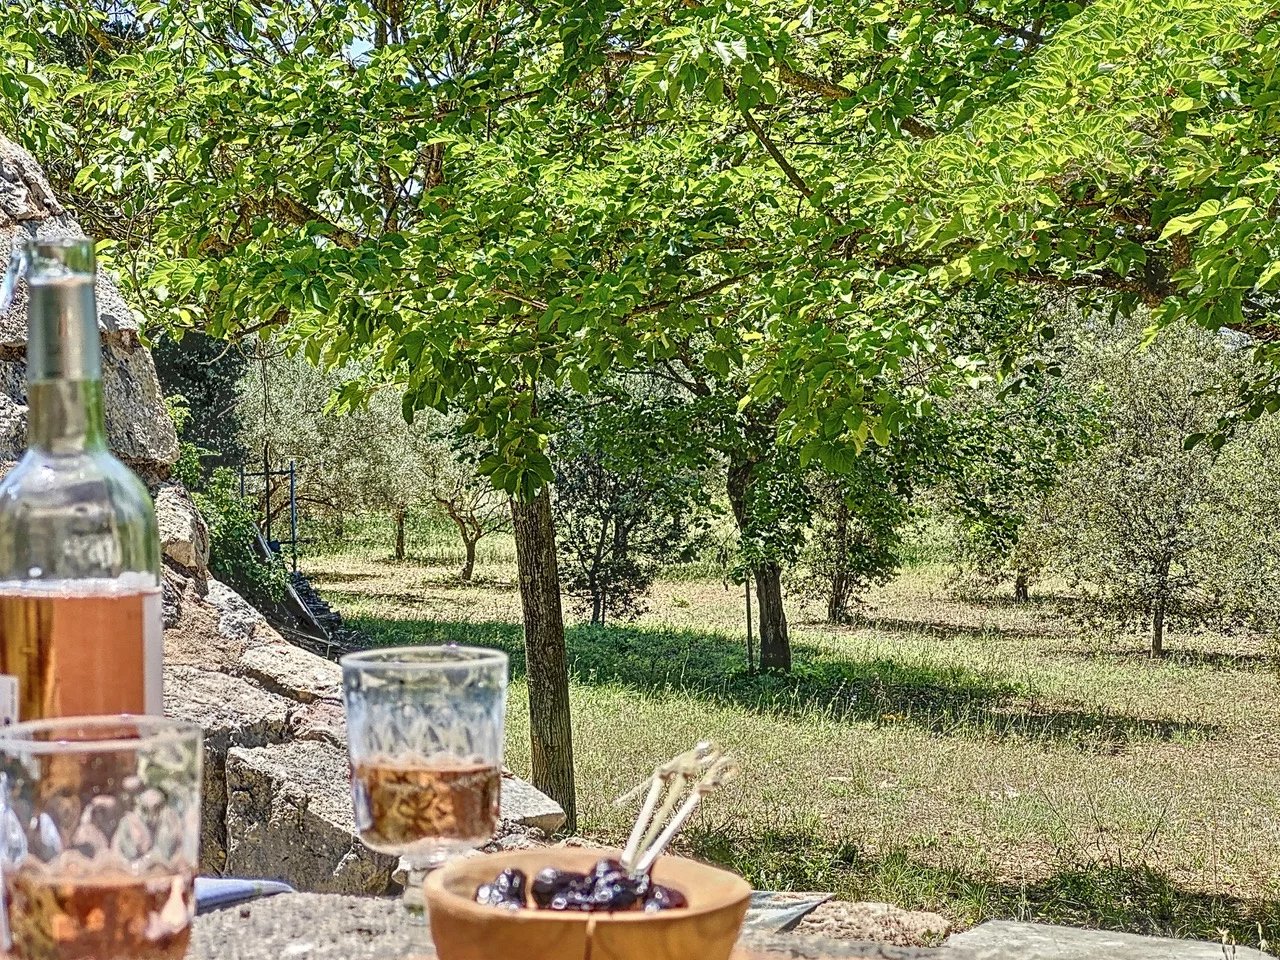 Unique opportunity in Cotignac: authentic property among the vineyards!